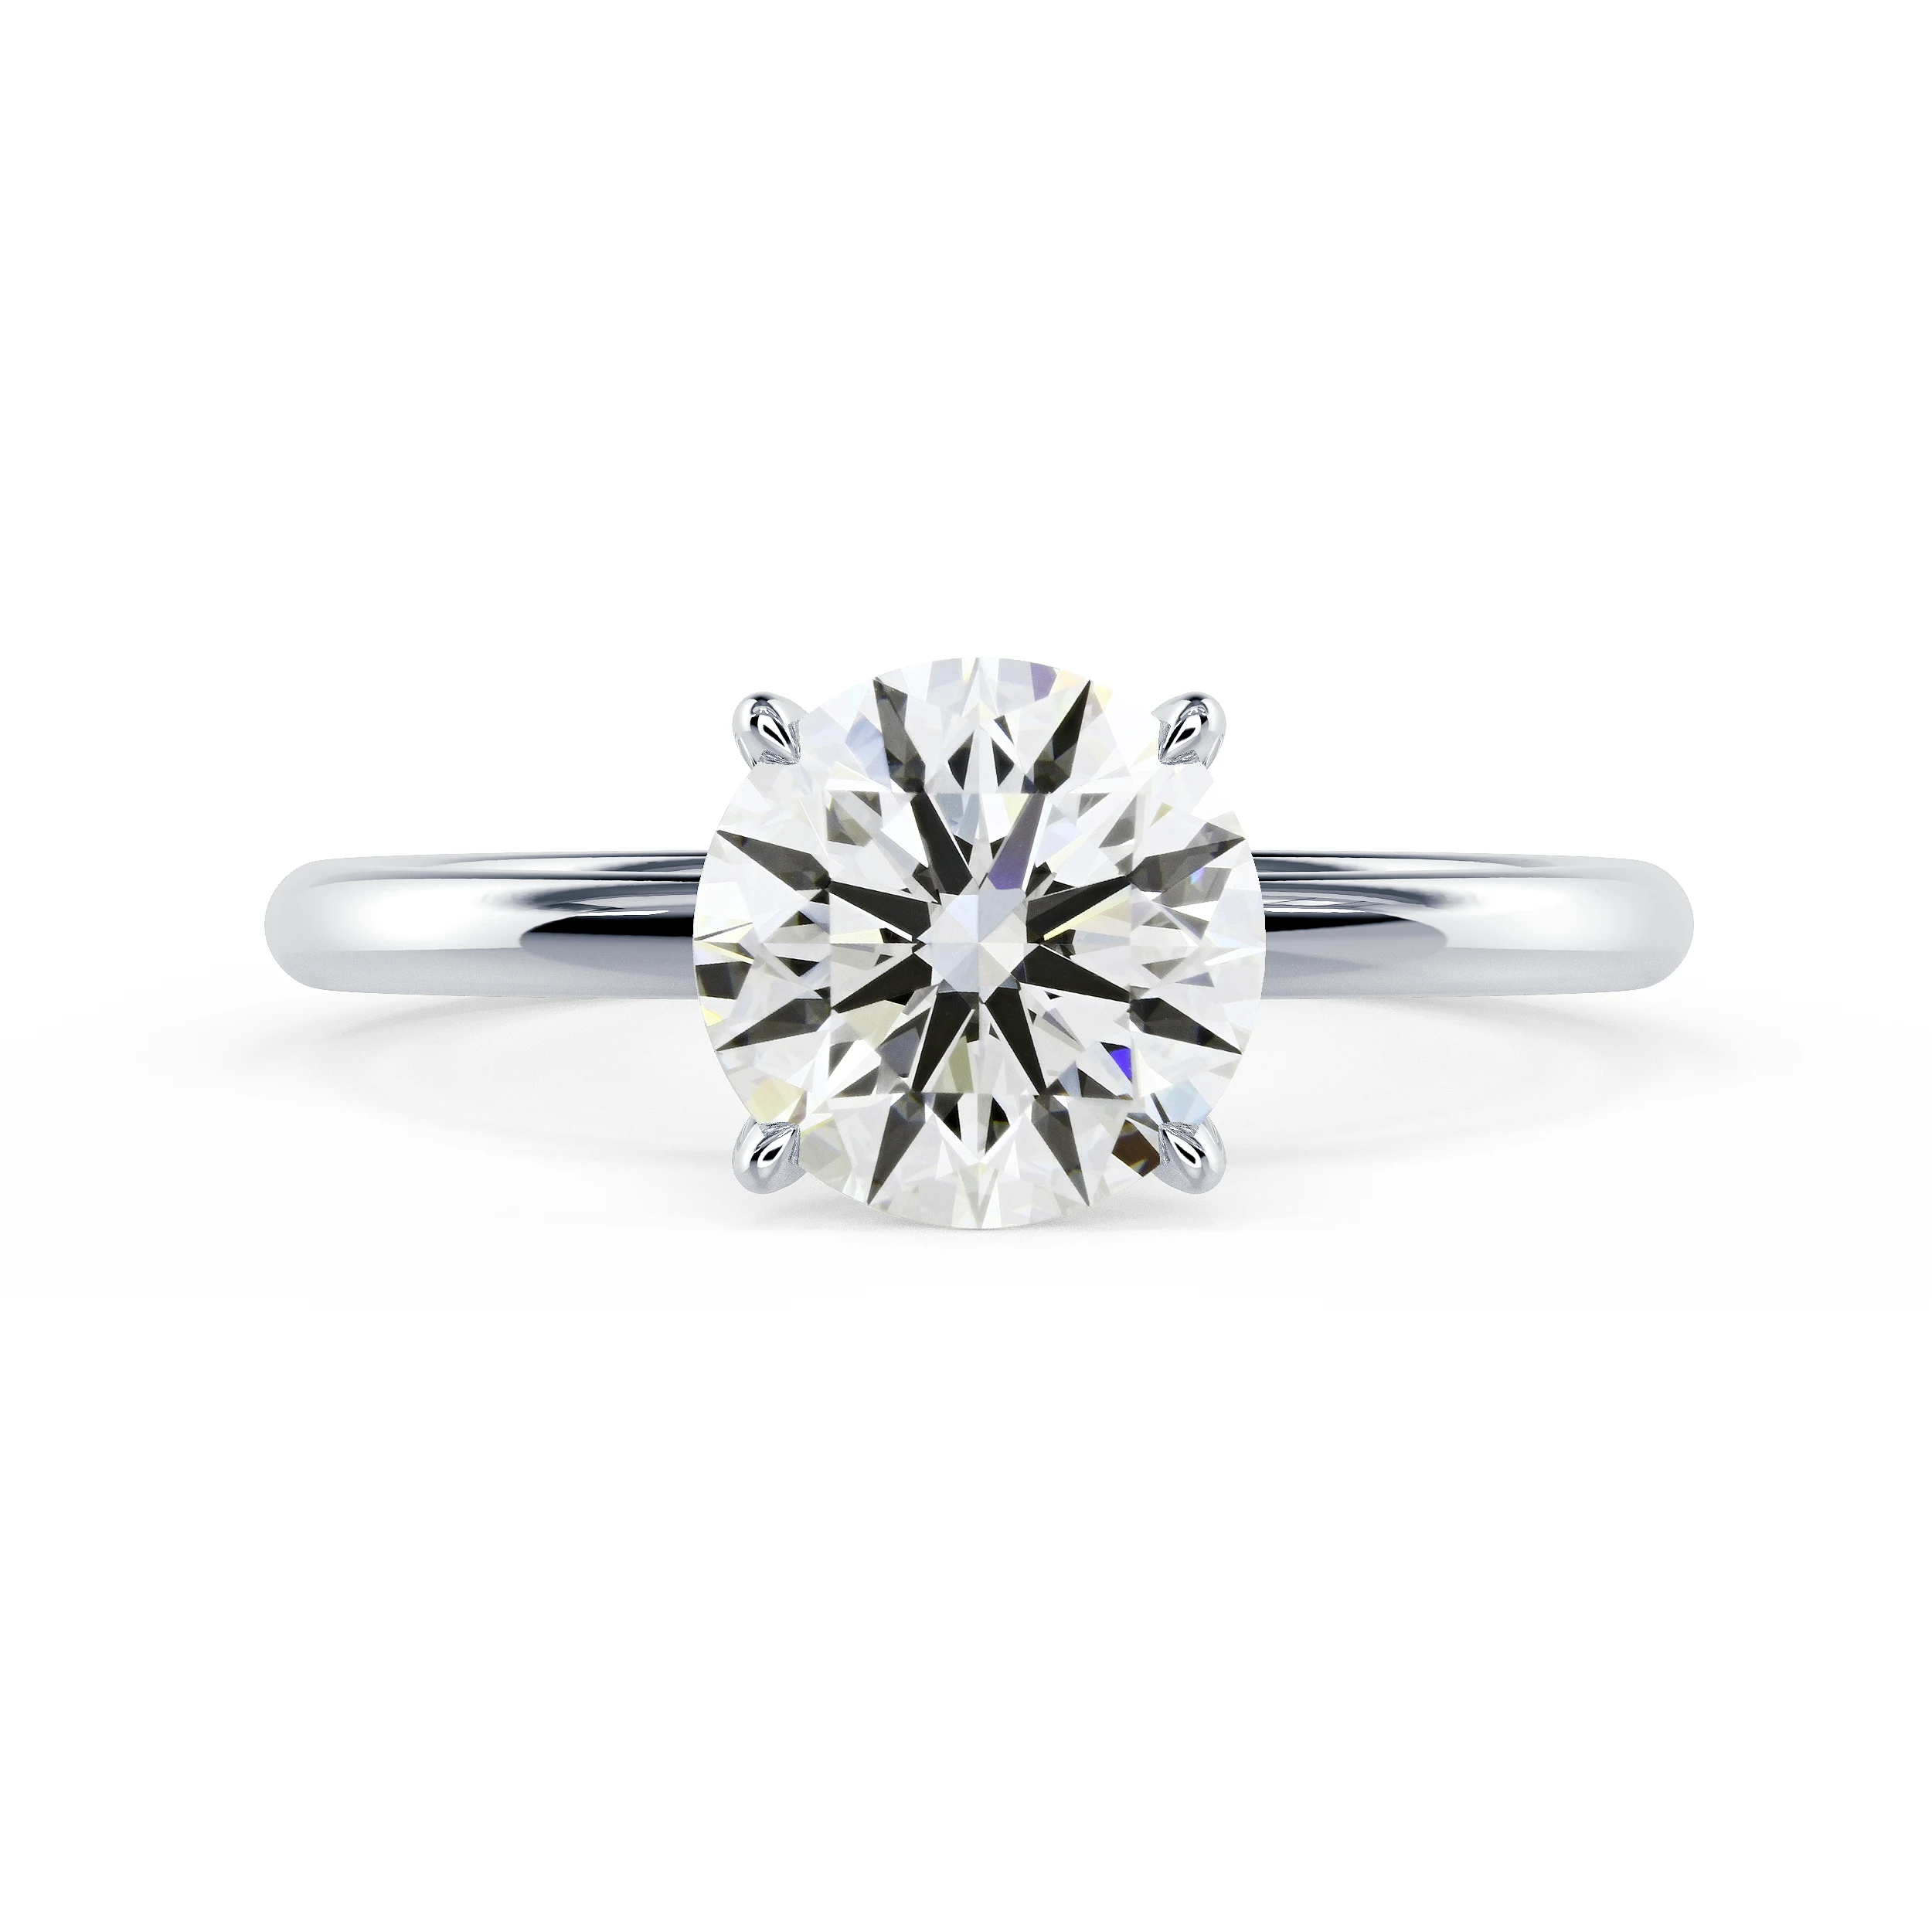 1.75 carat Round Lab-Created Diamond in Classic Four-Prong Solitaire Engagement Ring, 18k White Gold